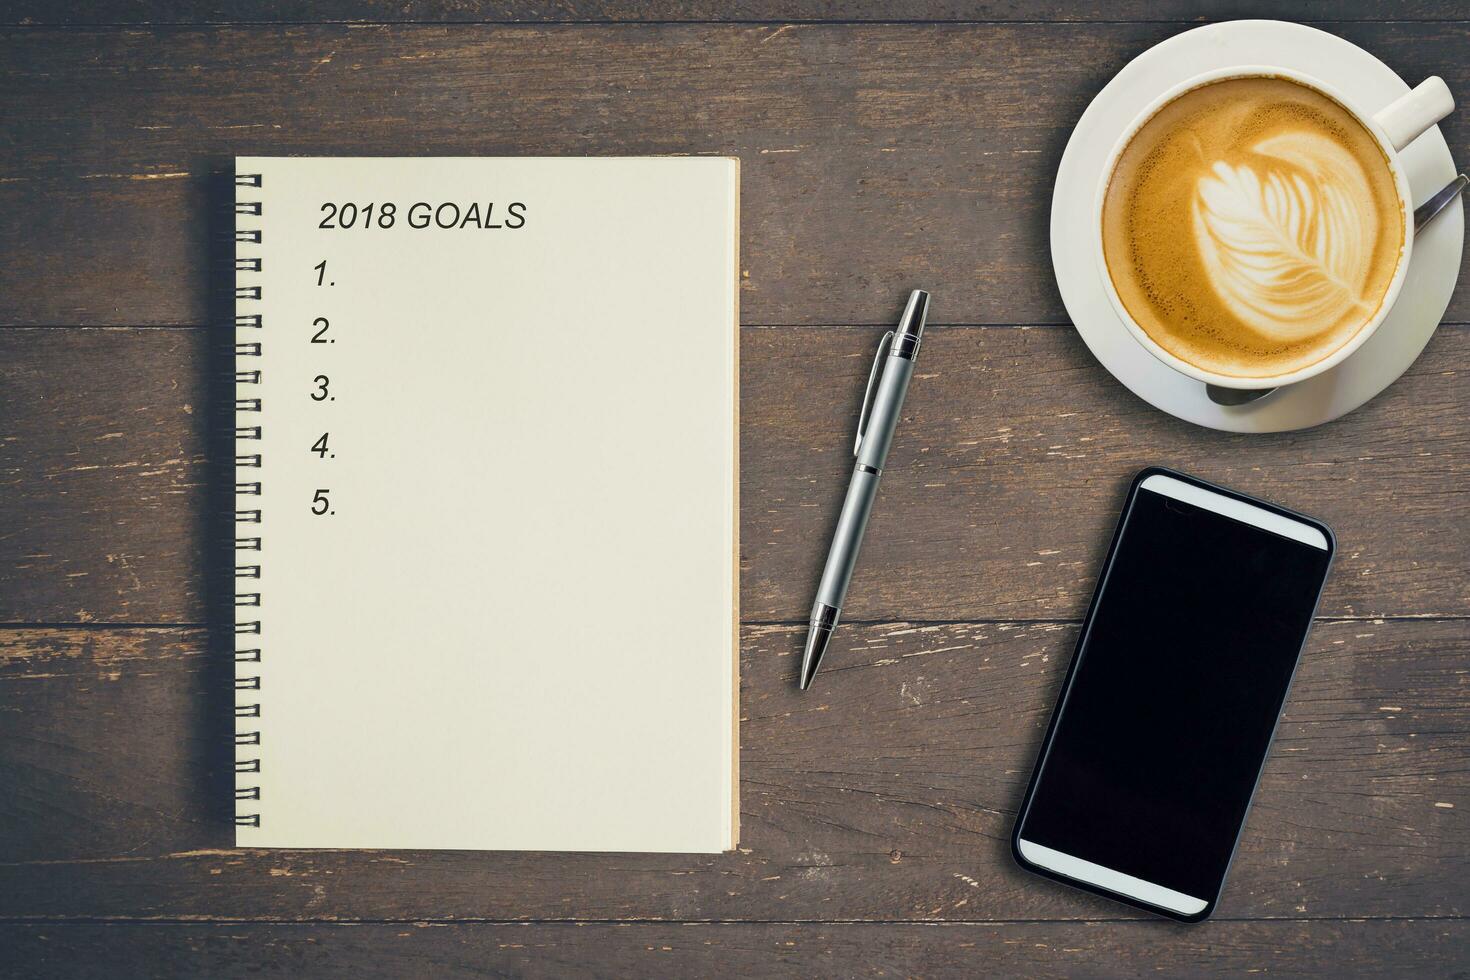 2018 GOALS on blank paper note book, coffee and phone on wood table background. photo